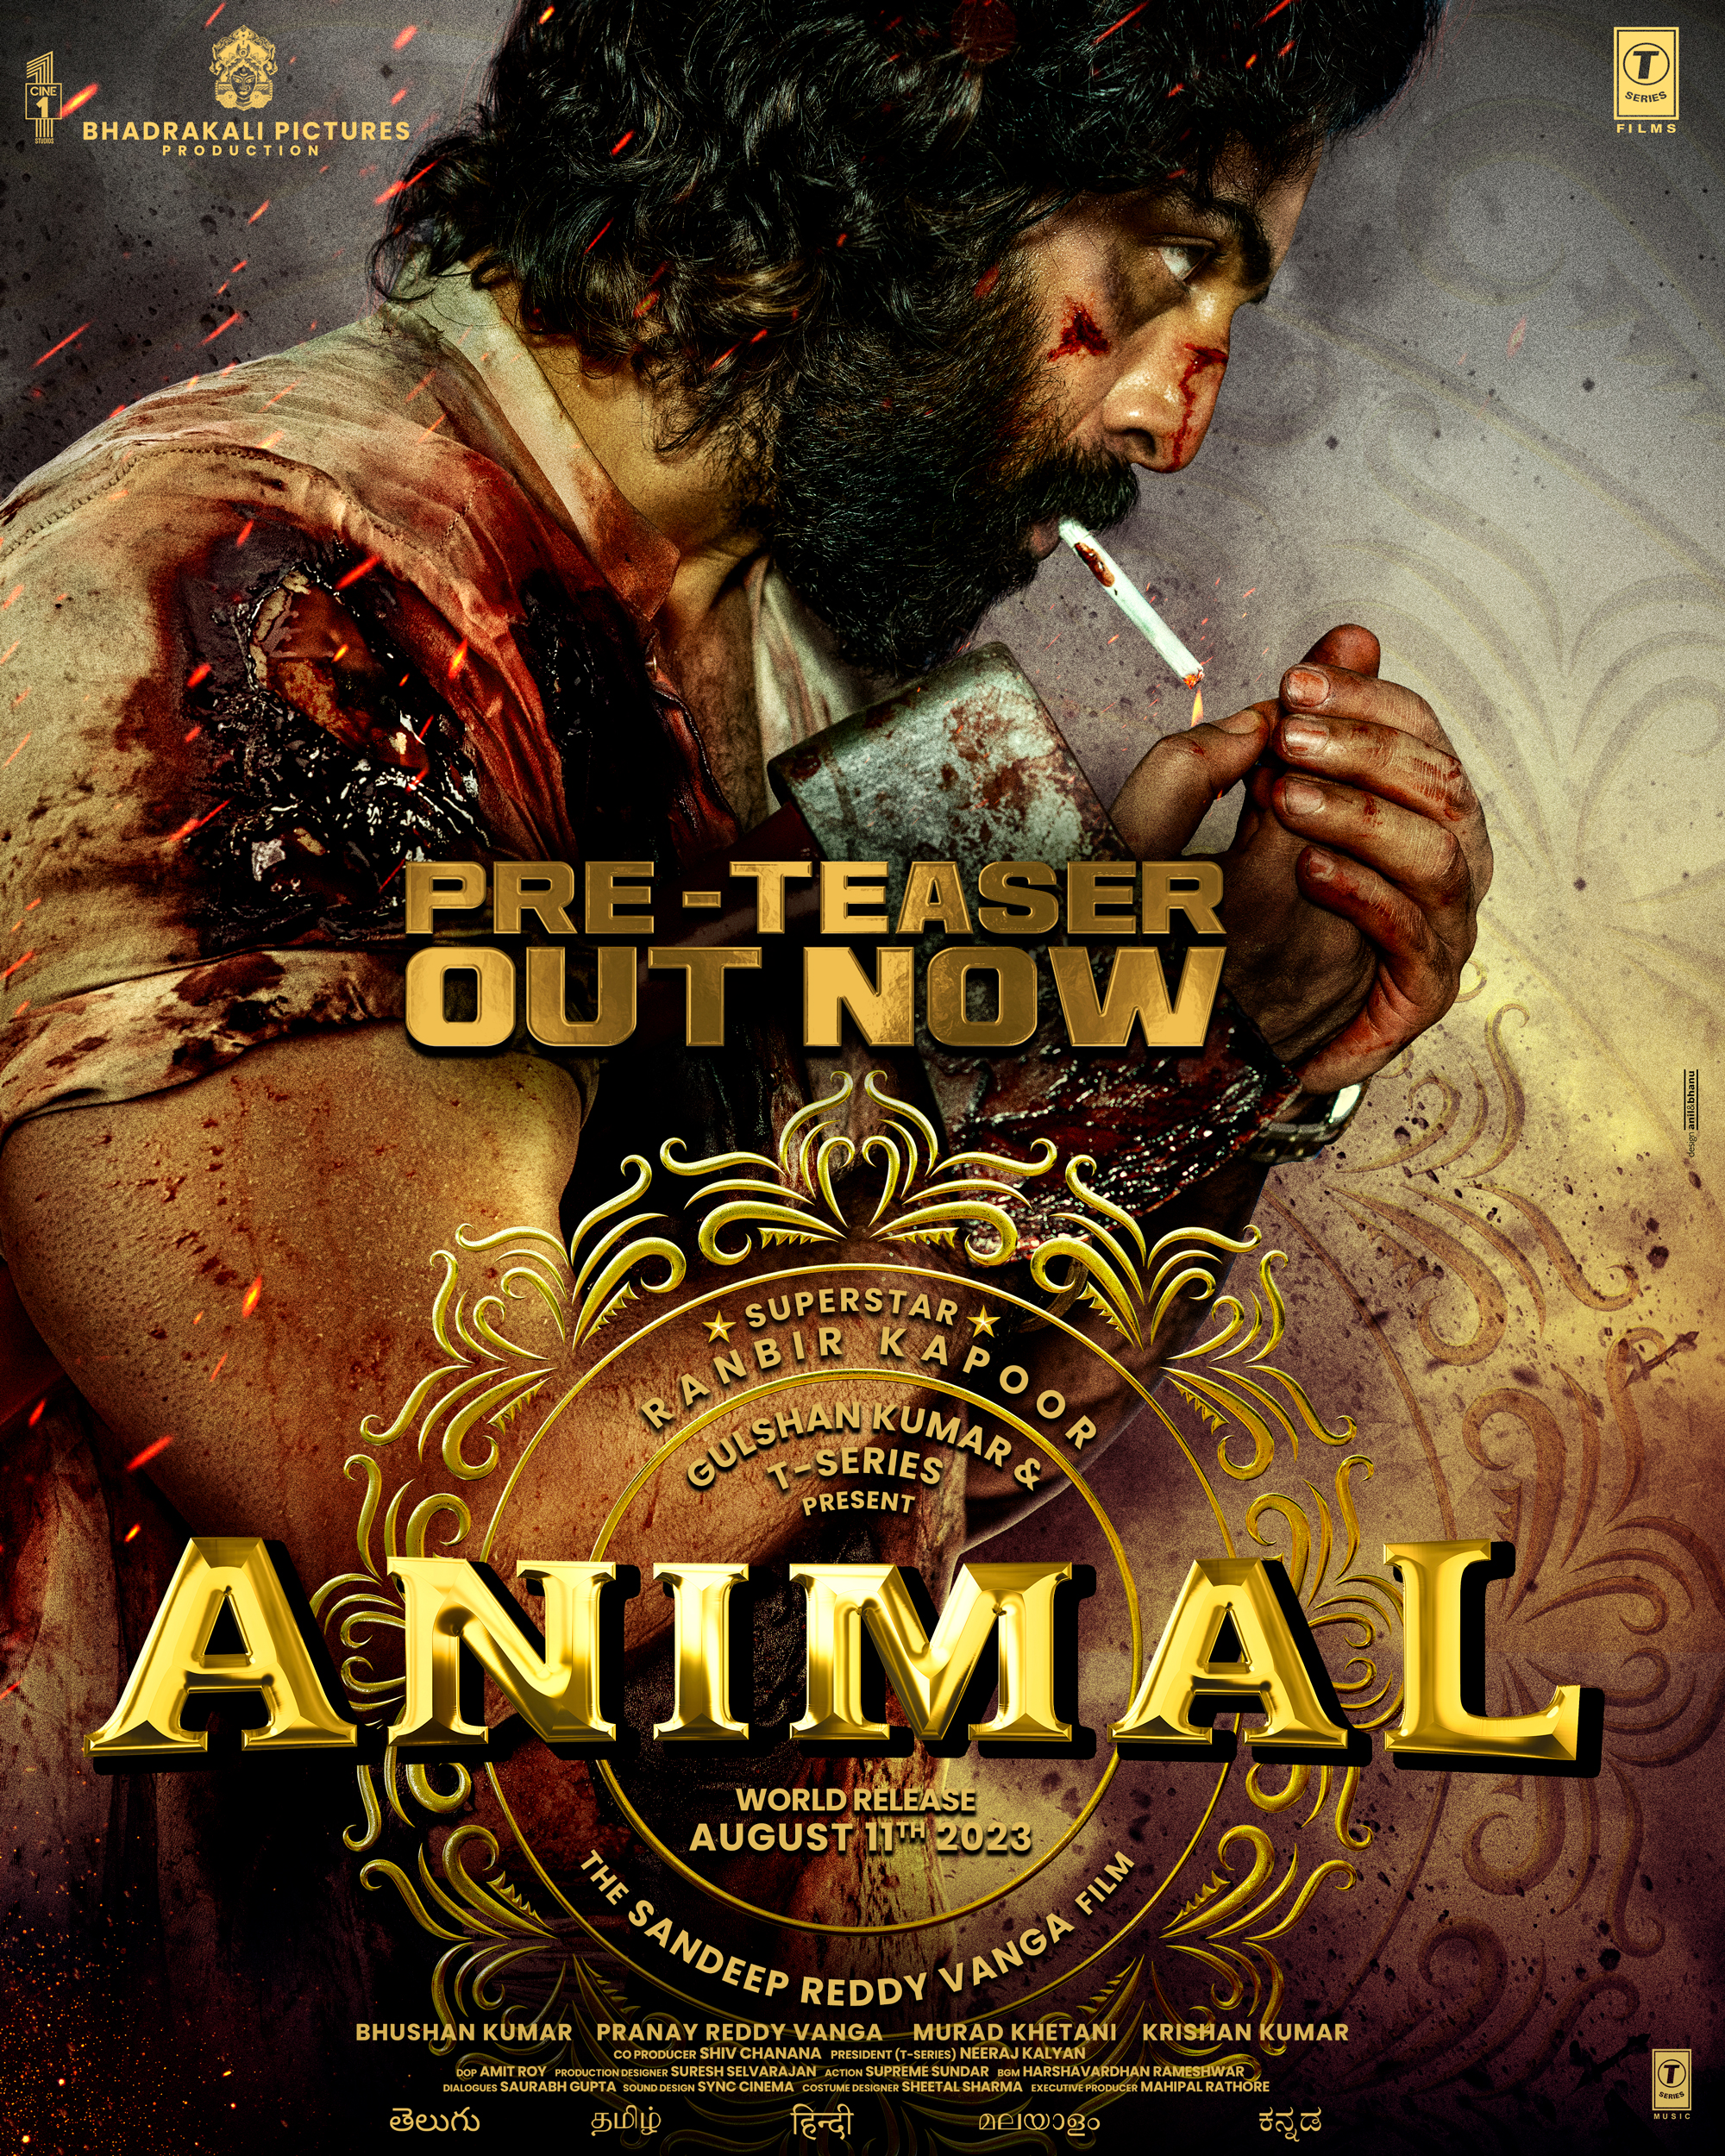 Unleashing the roar of “Animal” , with the dynamic combination of actor Ranbir Kapoor and writer-director Sandeep Reddy Vanga’s Pre-Teaser ignites cinematic frenzy with its intense and captivating world!